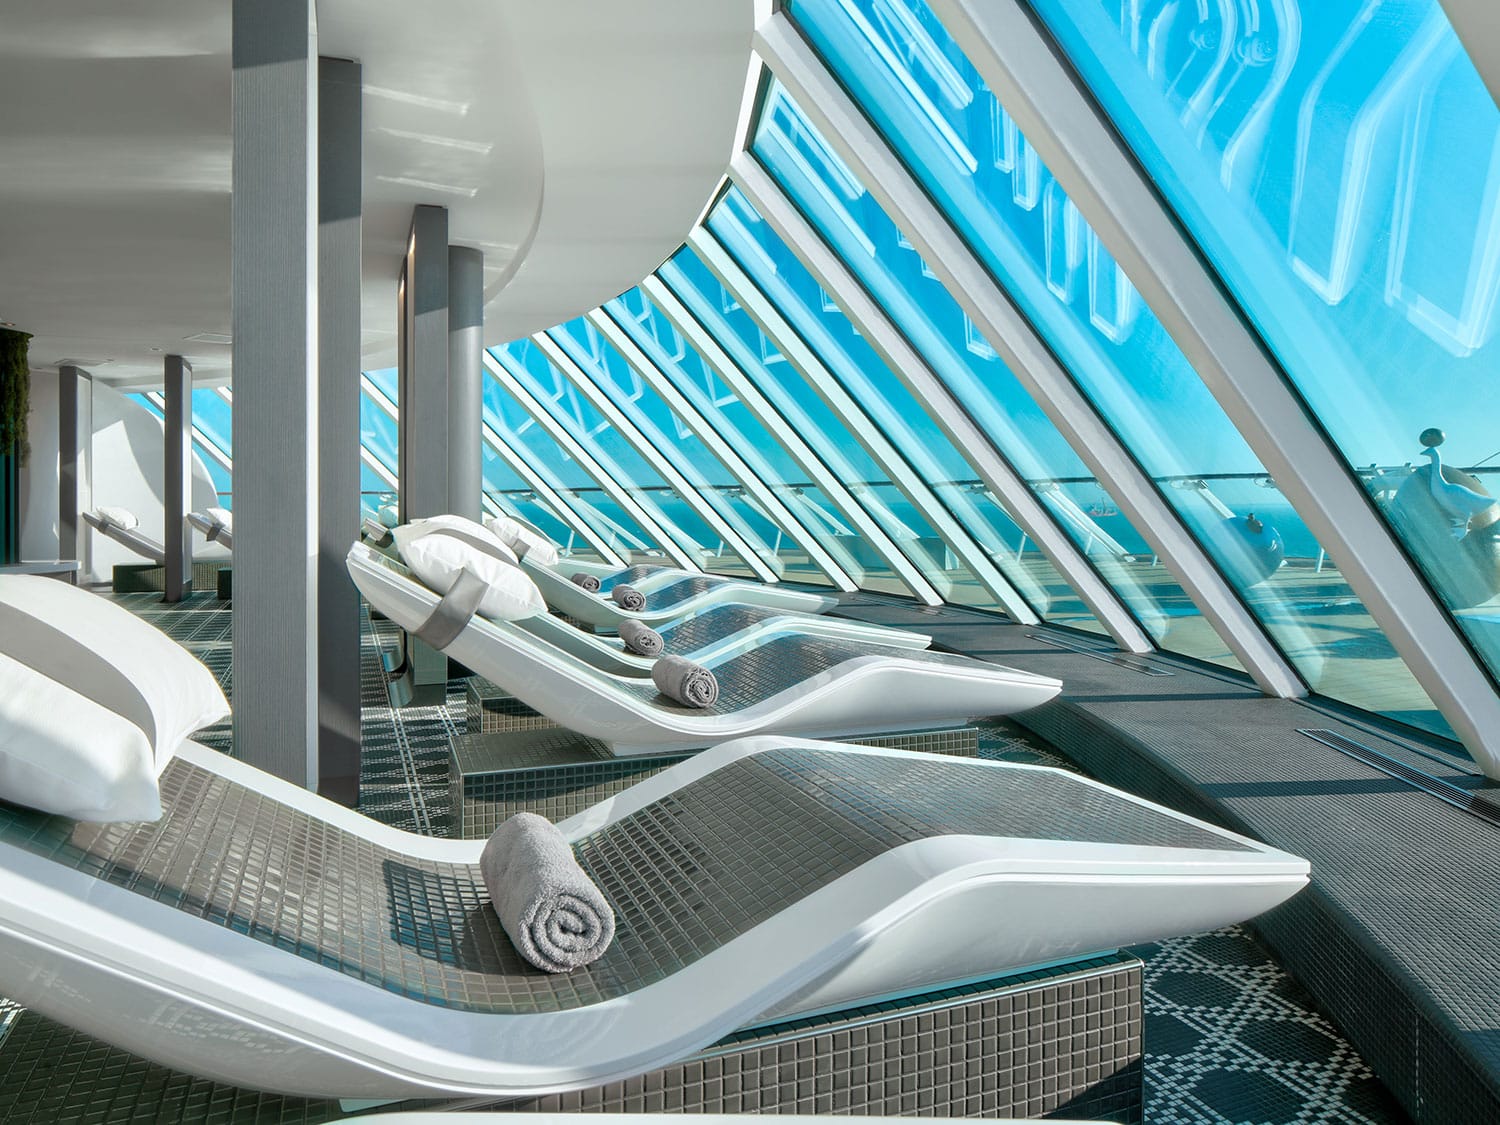 The interior of the SEA Thermal Suite on the Celebrity beyond cruise ship from Celebrity Cruises.